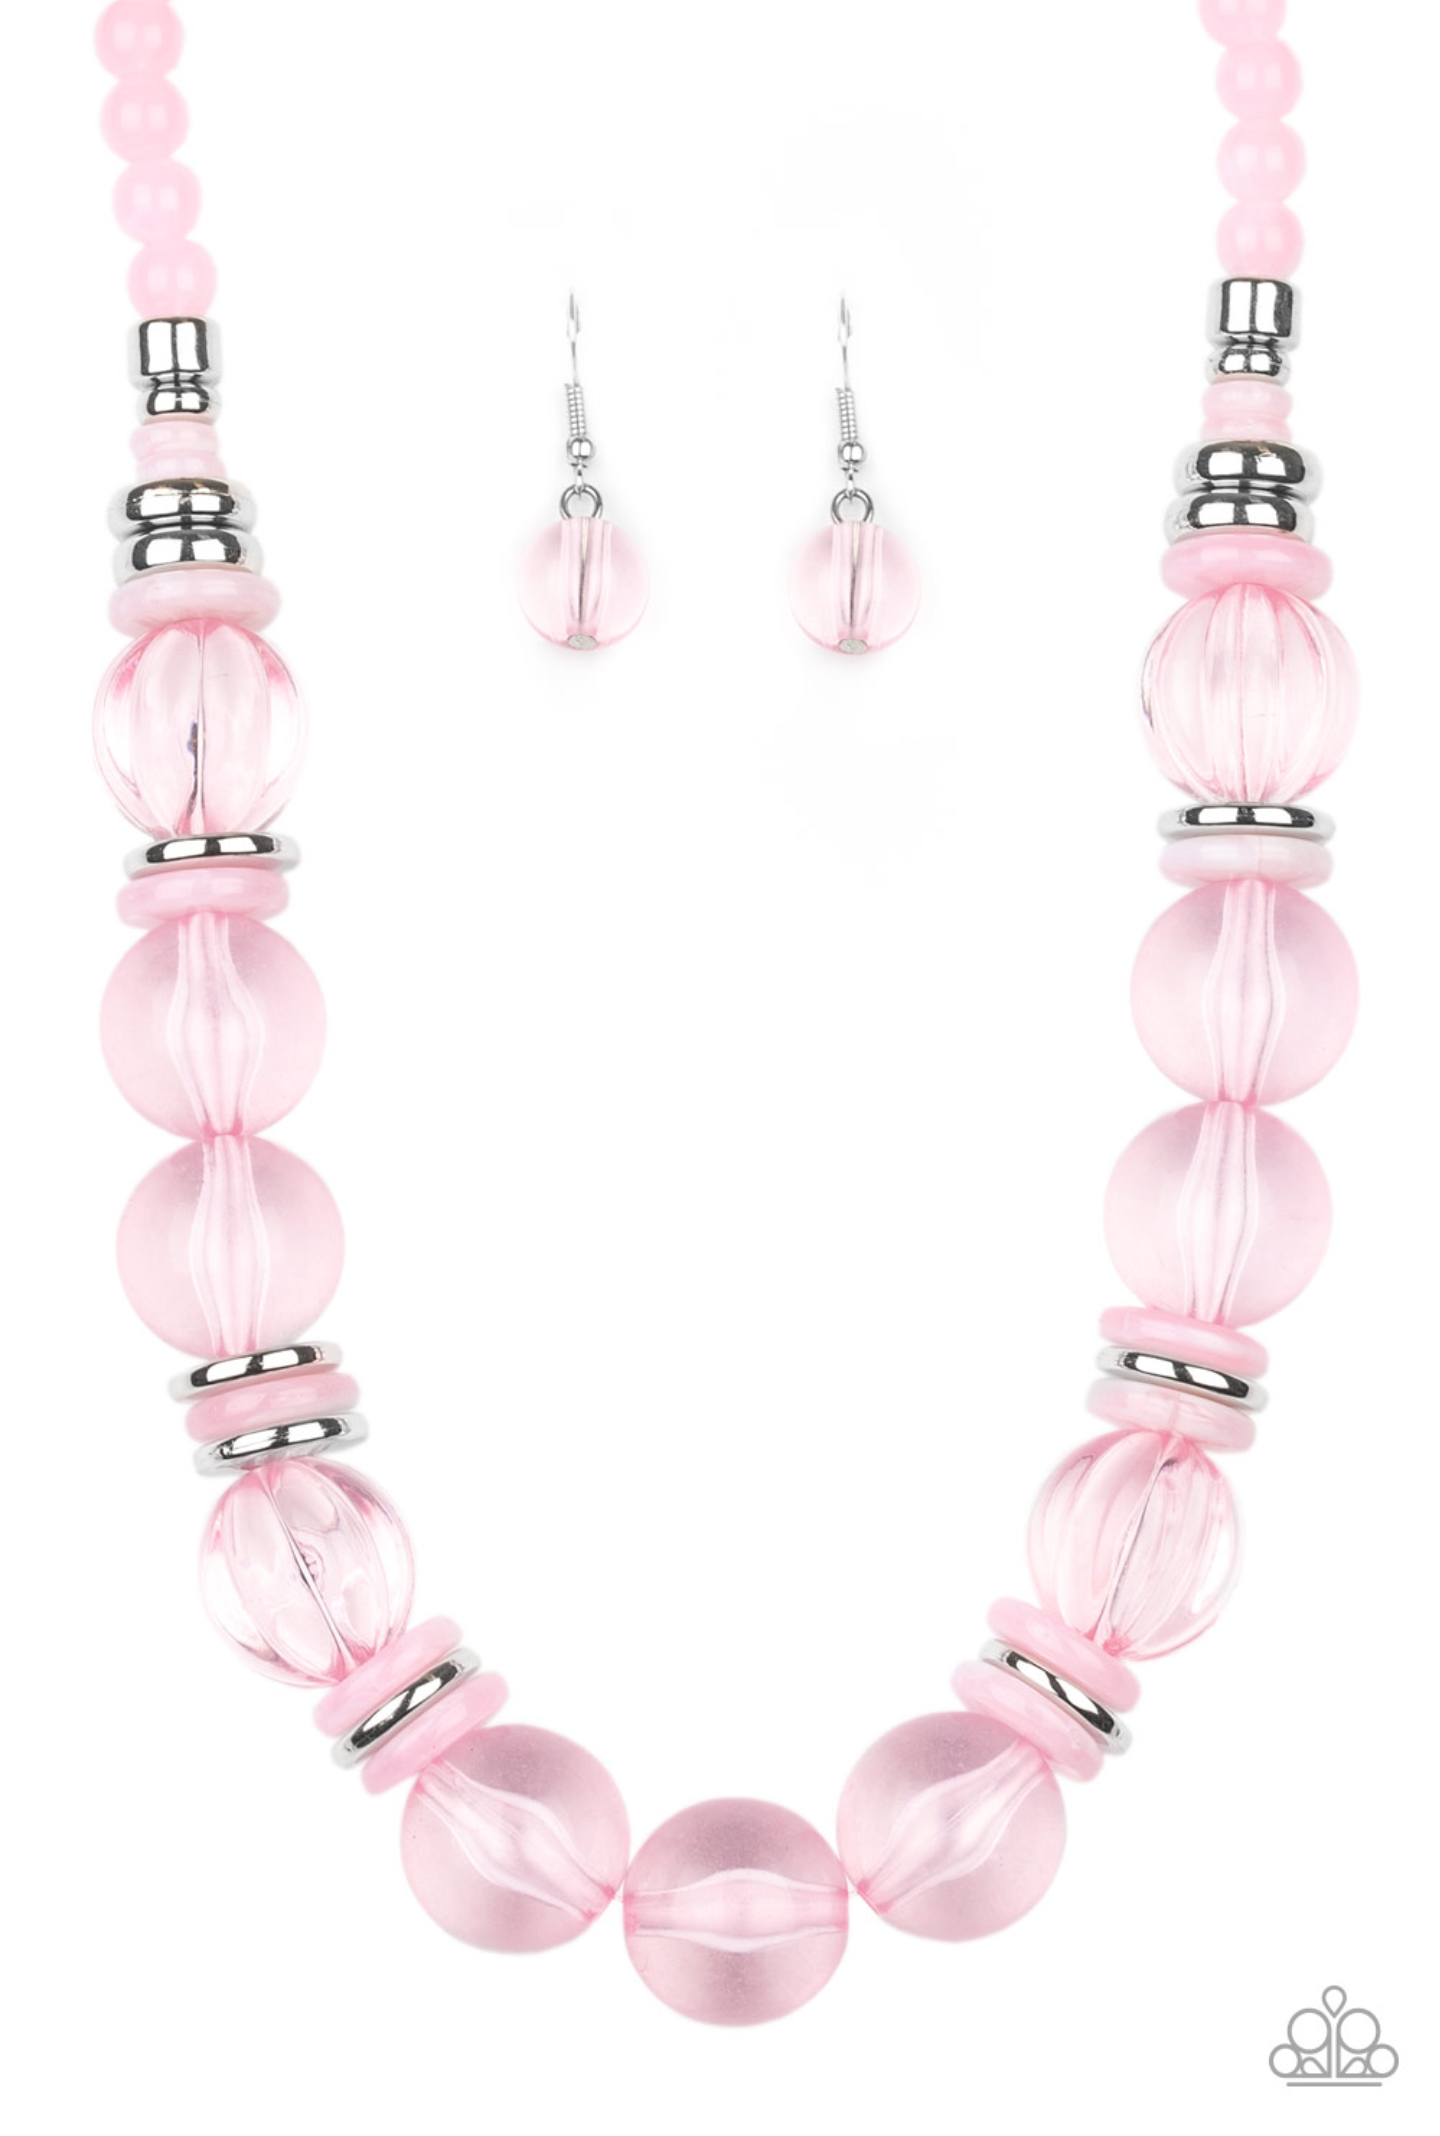 Bubbly Beauty - Pink - VJ Bedazzled Jewelry